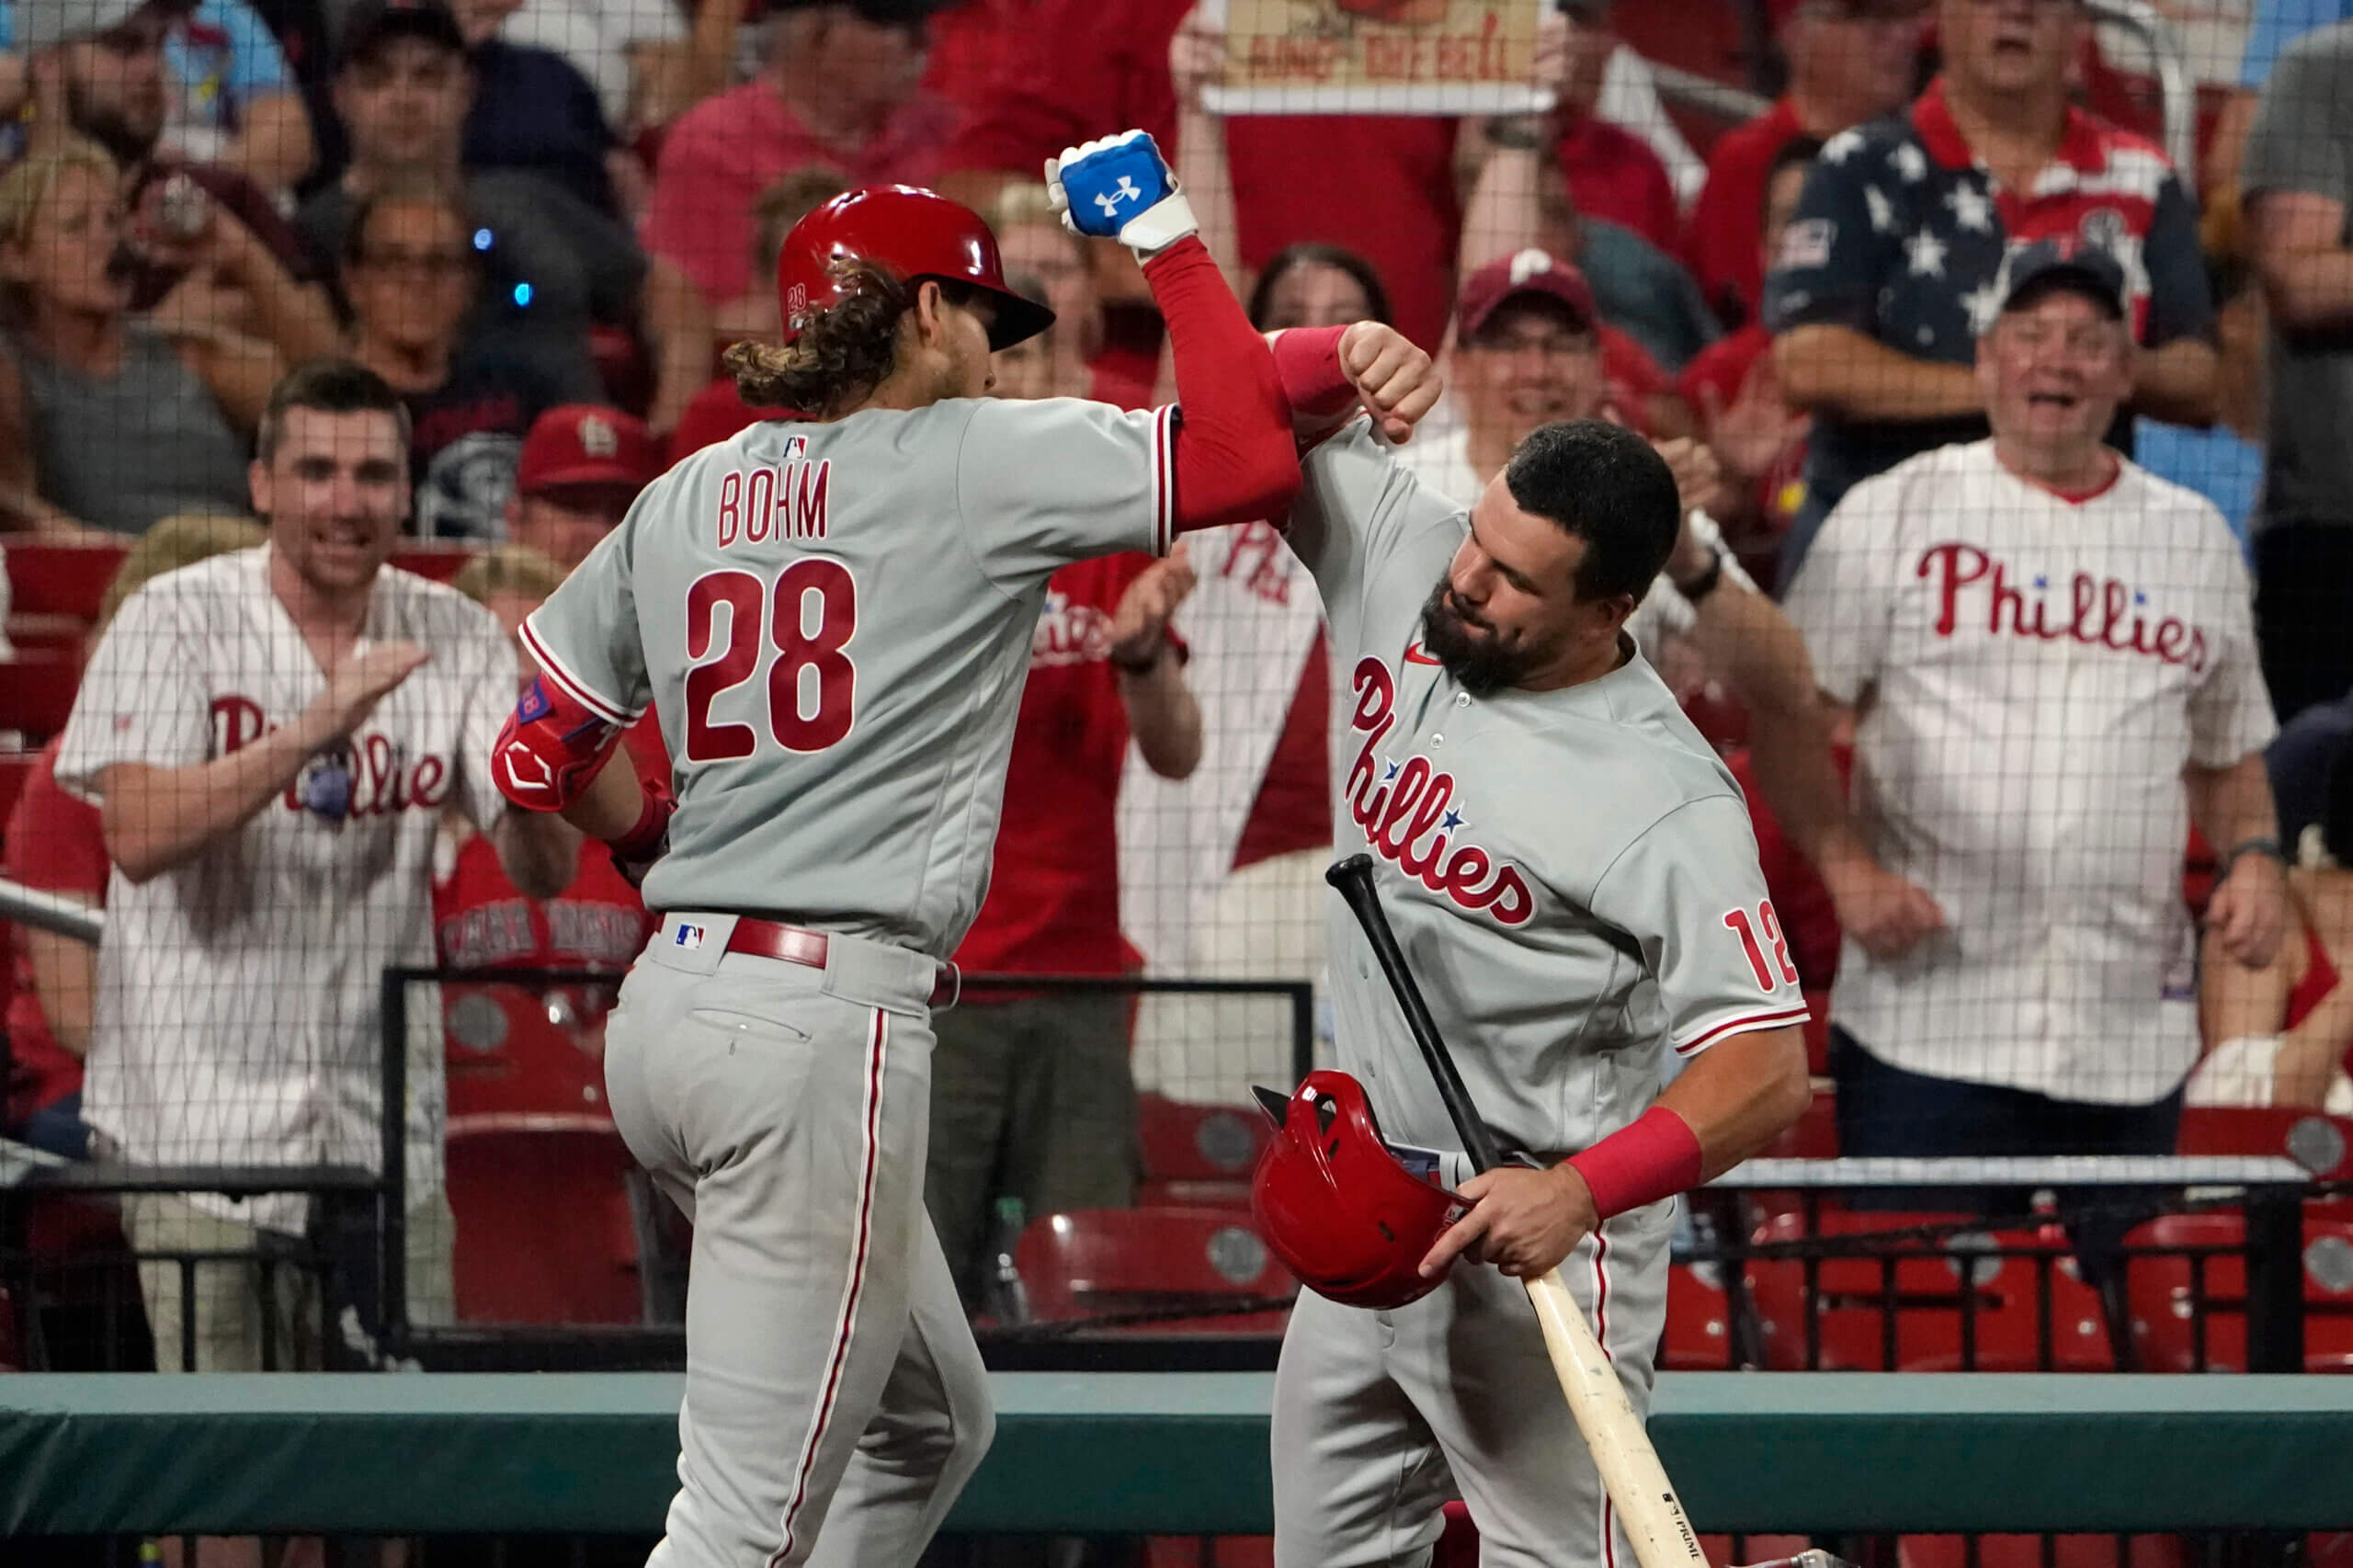 Phillies see the momentum quickly shift in Game 2 with the force